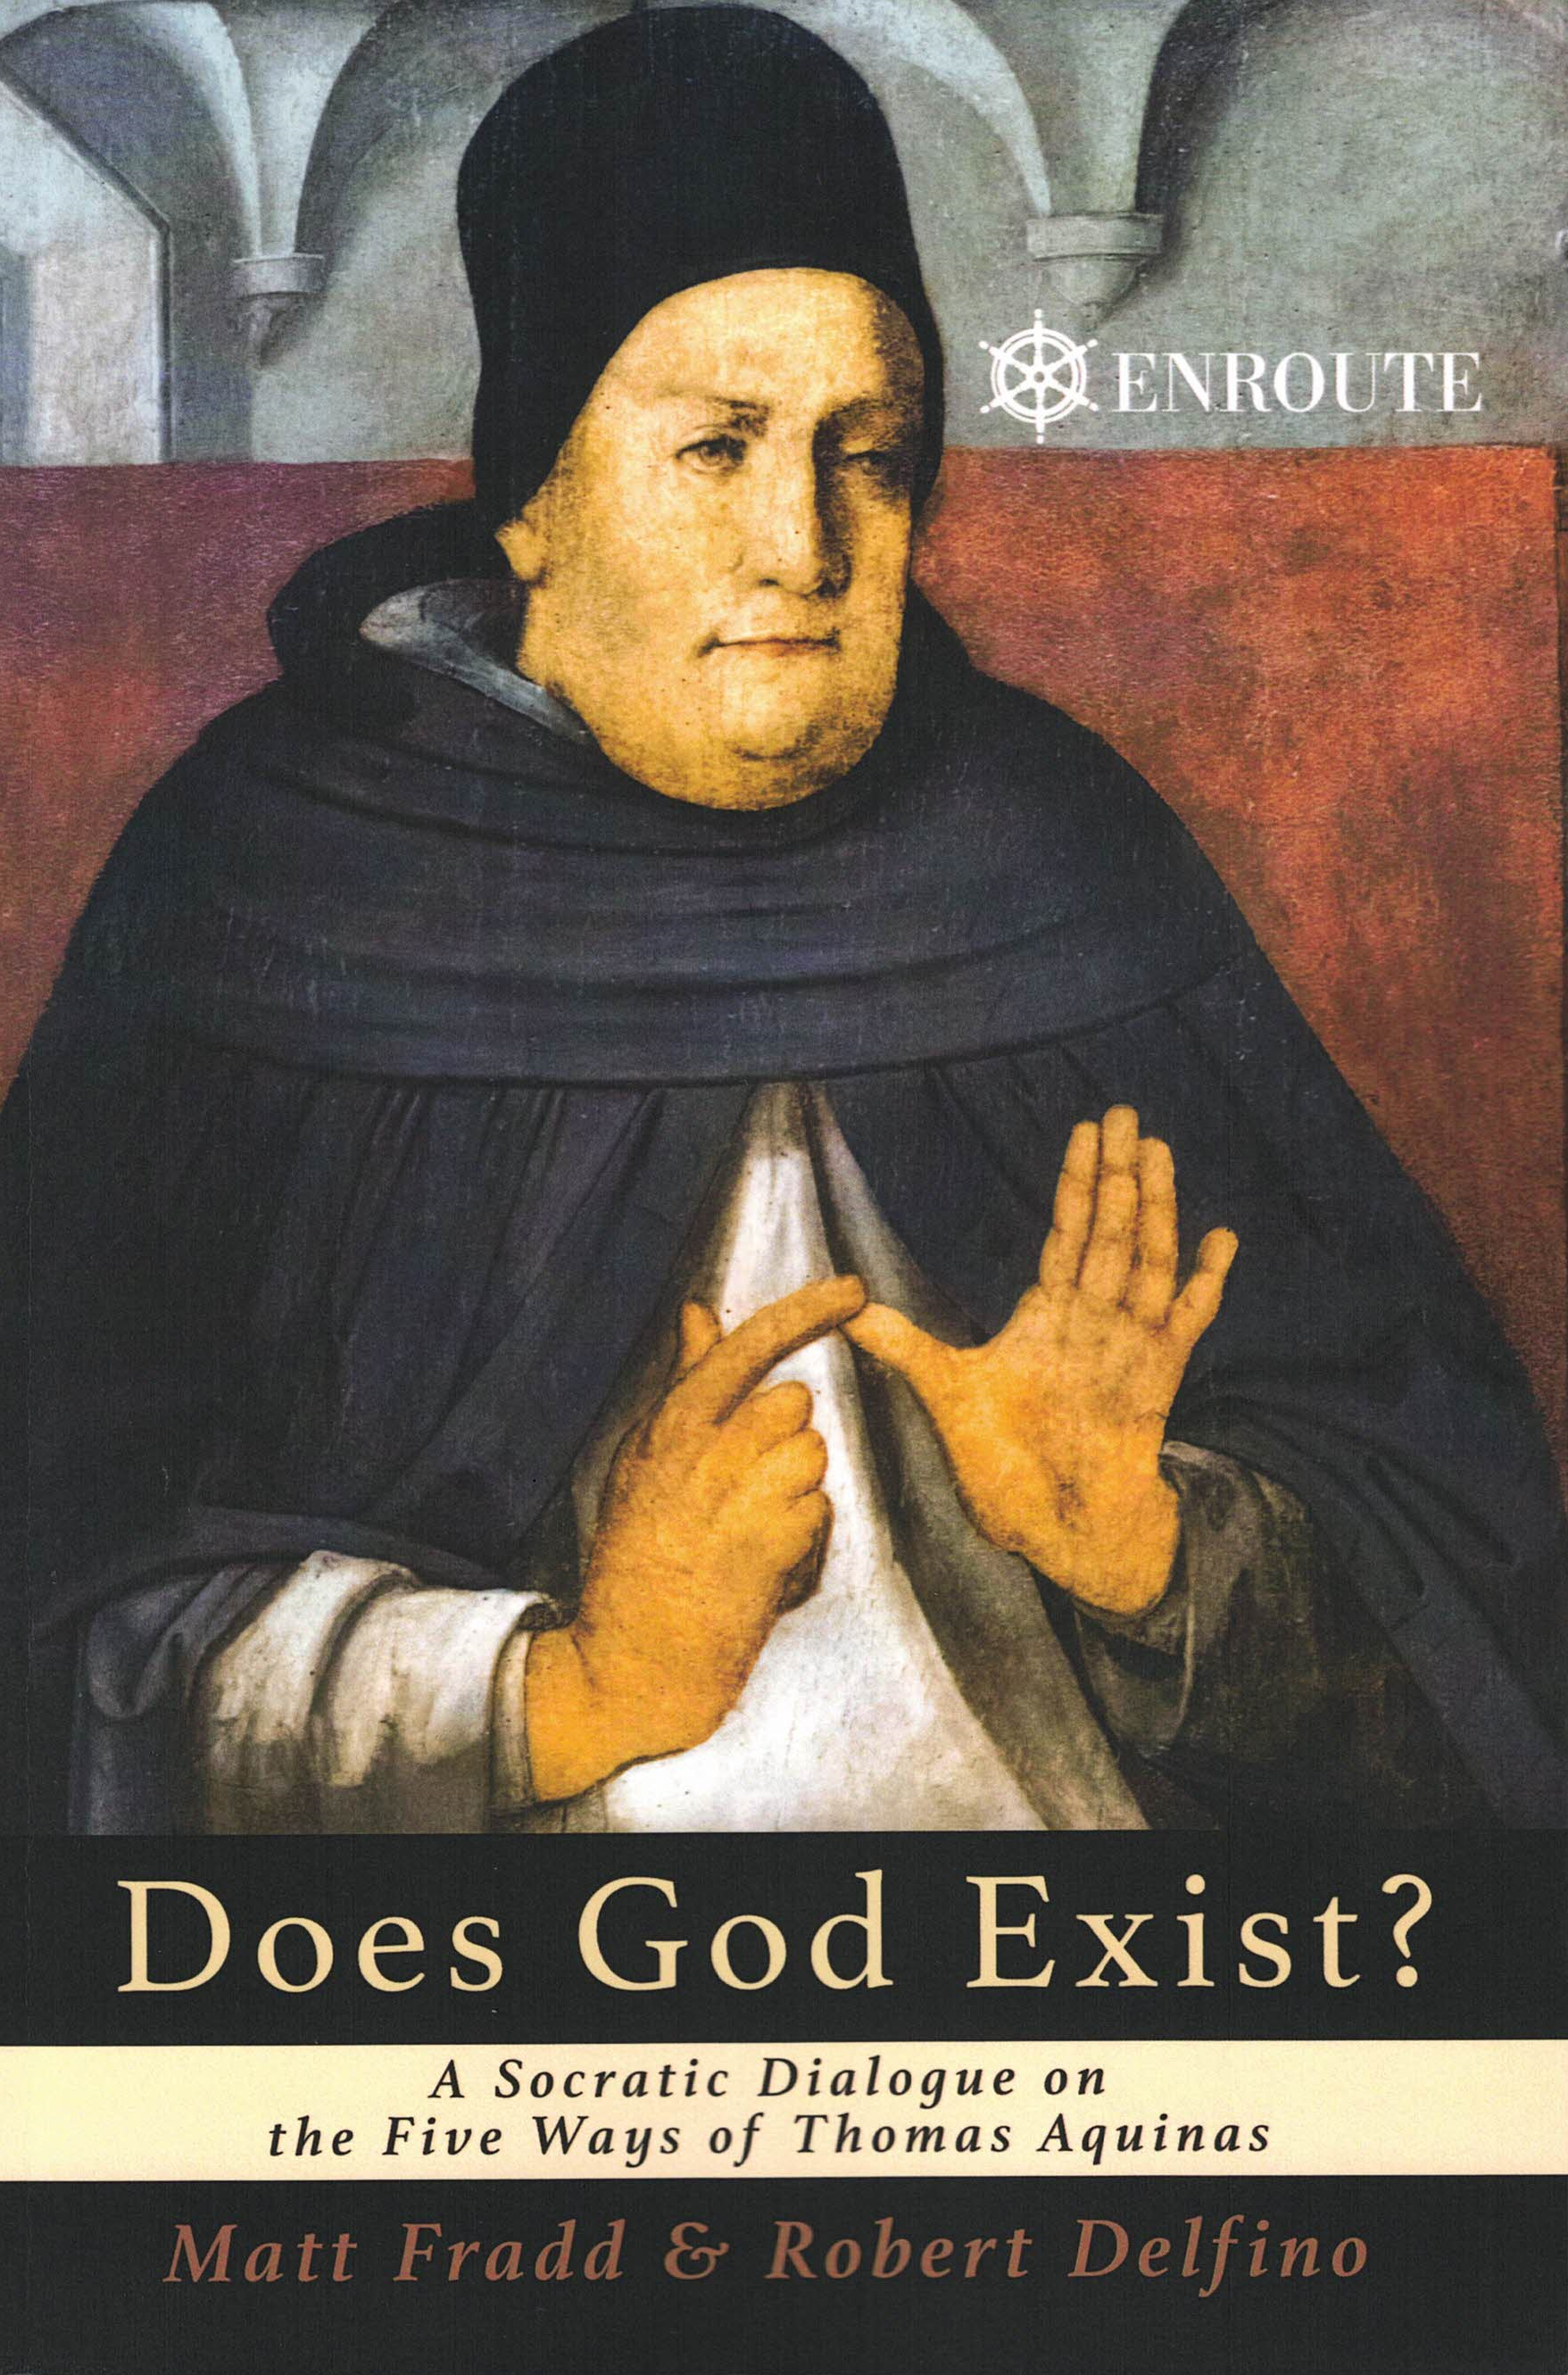 Does God Exist?  Front cover